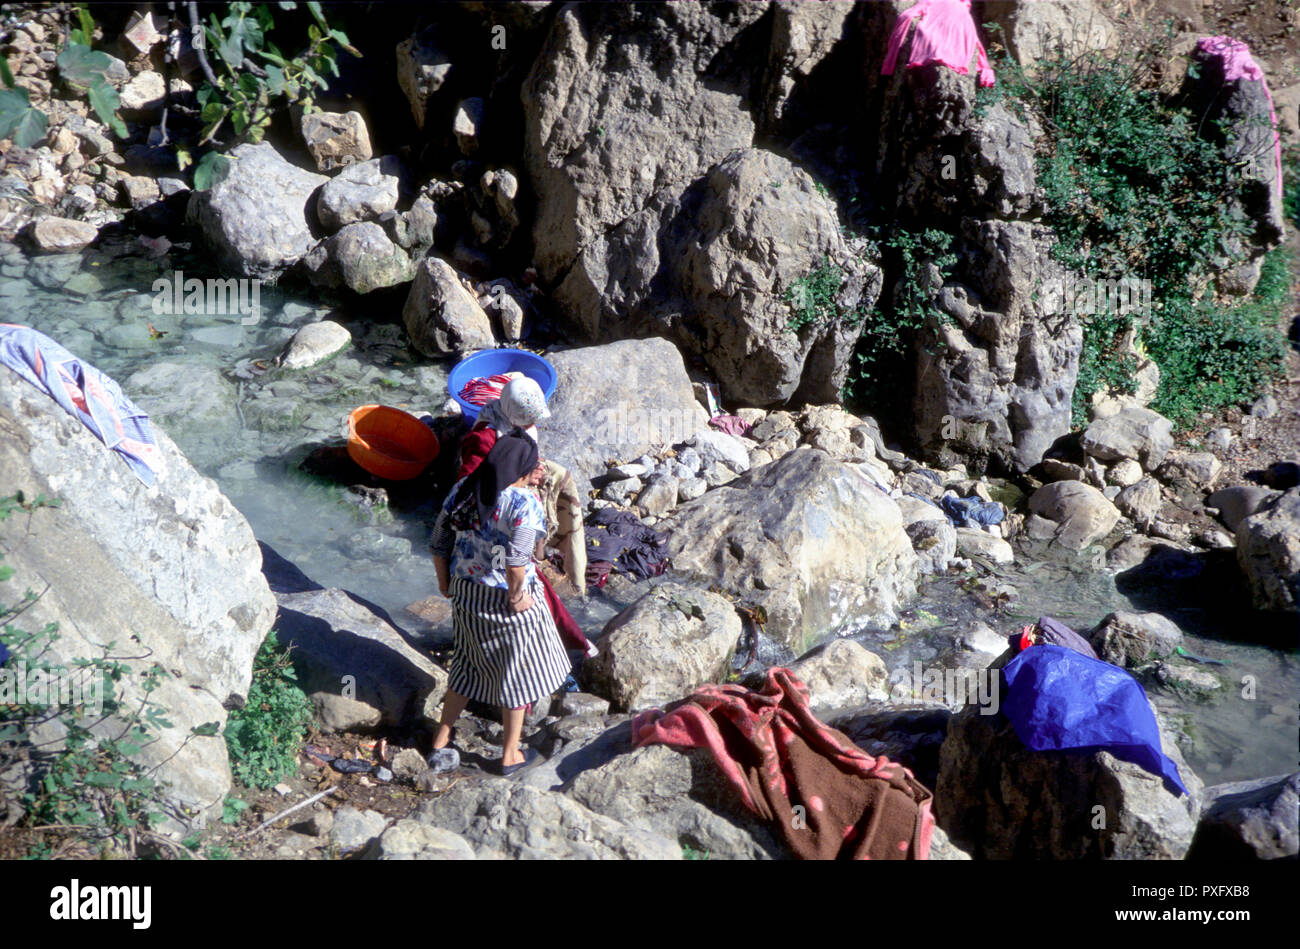 Moroccan women washing clothes on rocks in a stream close to Chefchauen, Rif mountains, Morocco, North Africa Stock Photo